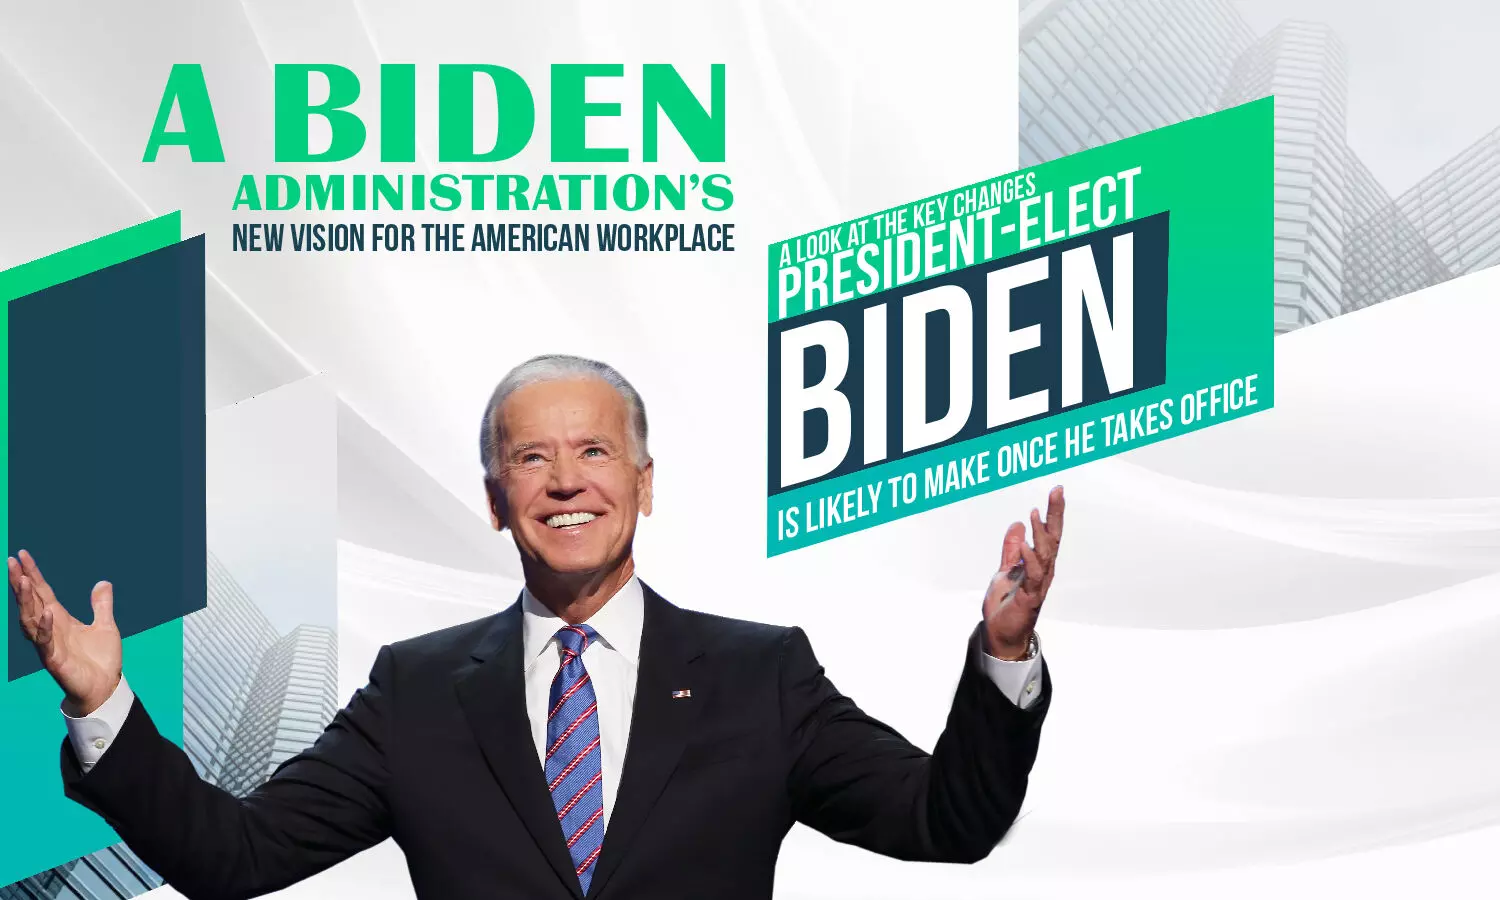 A Biden Administrations New Vision for the American Workplace